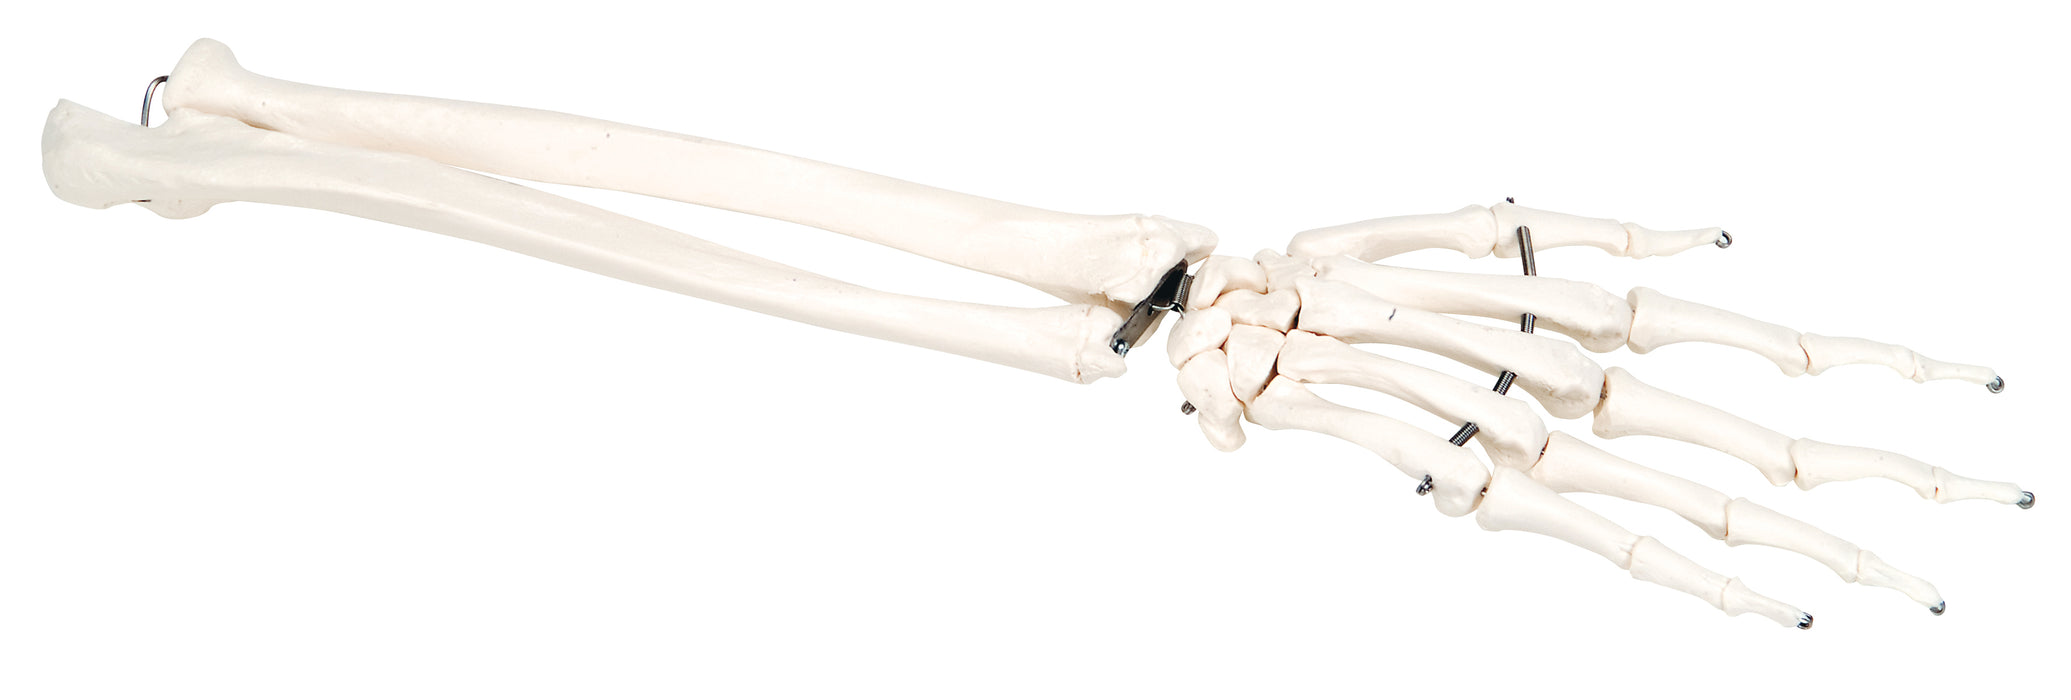 3B Scientific 12-4581L Anatomical Model - Loose Bones, Hand Skeleton With Ulna And Radius (Wire) - Includes 3B Smart Anatomy